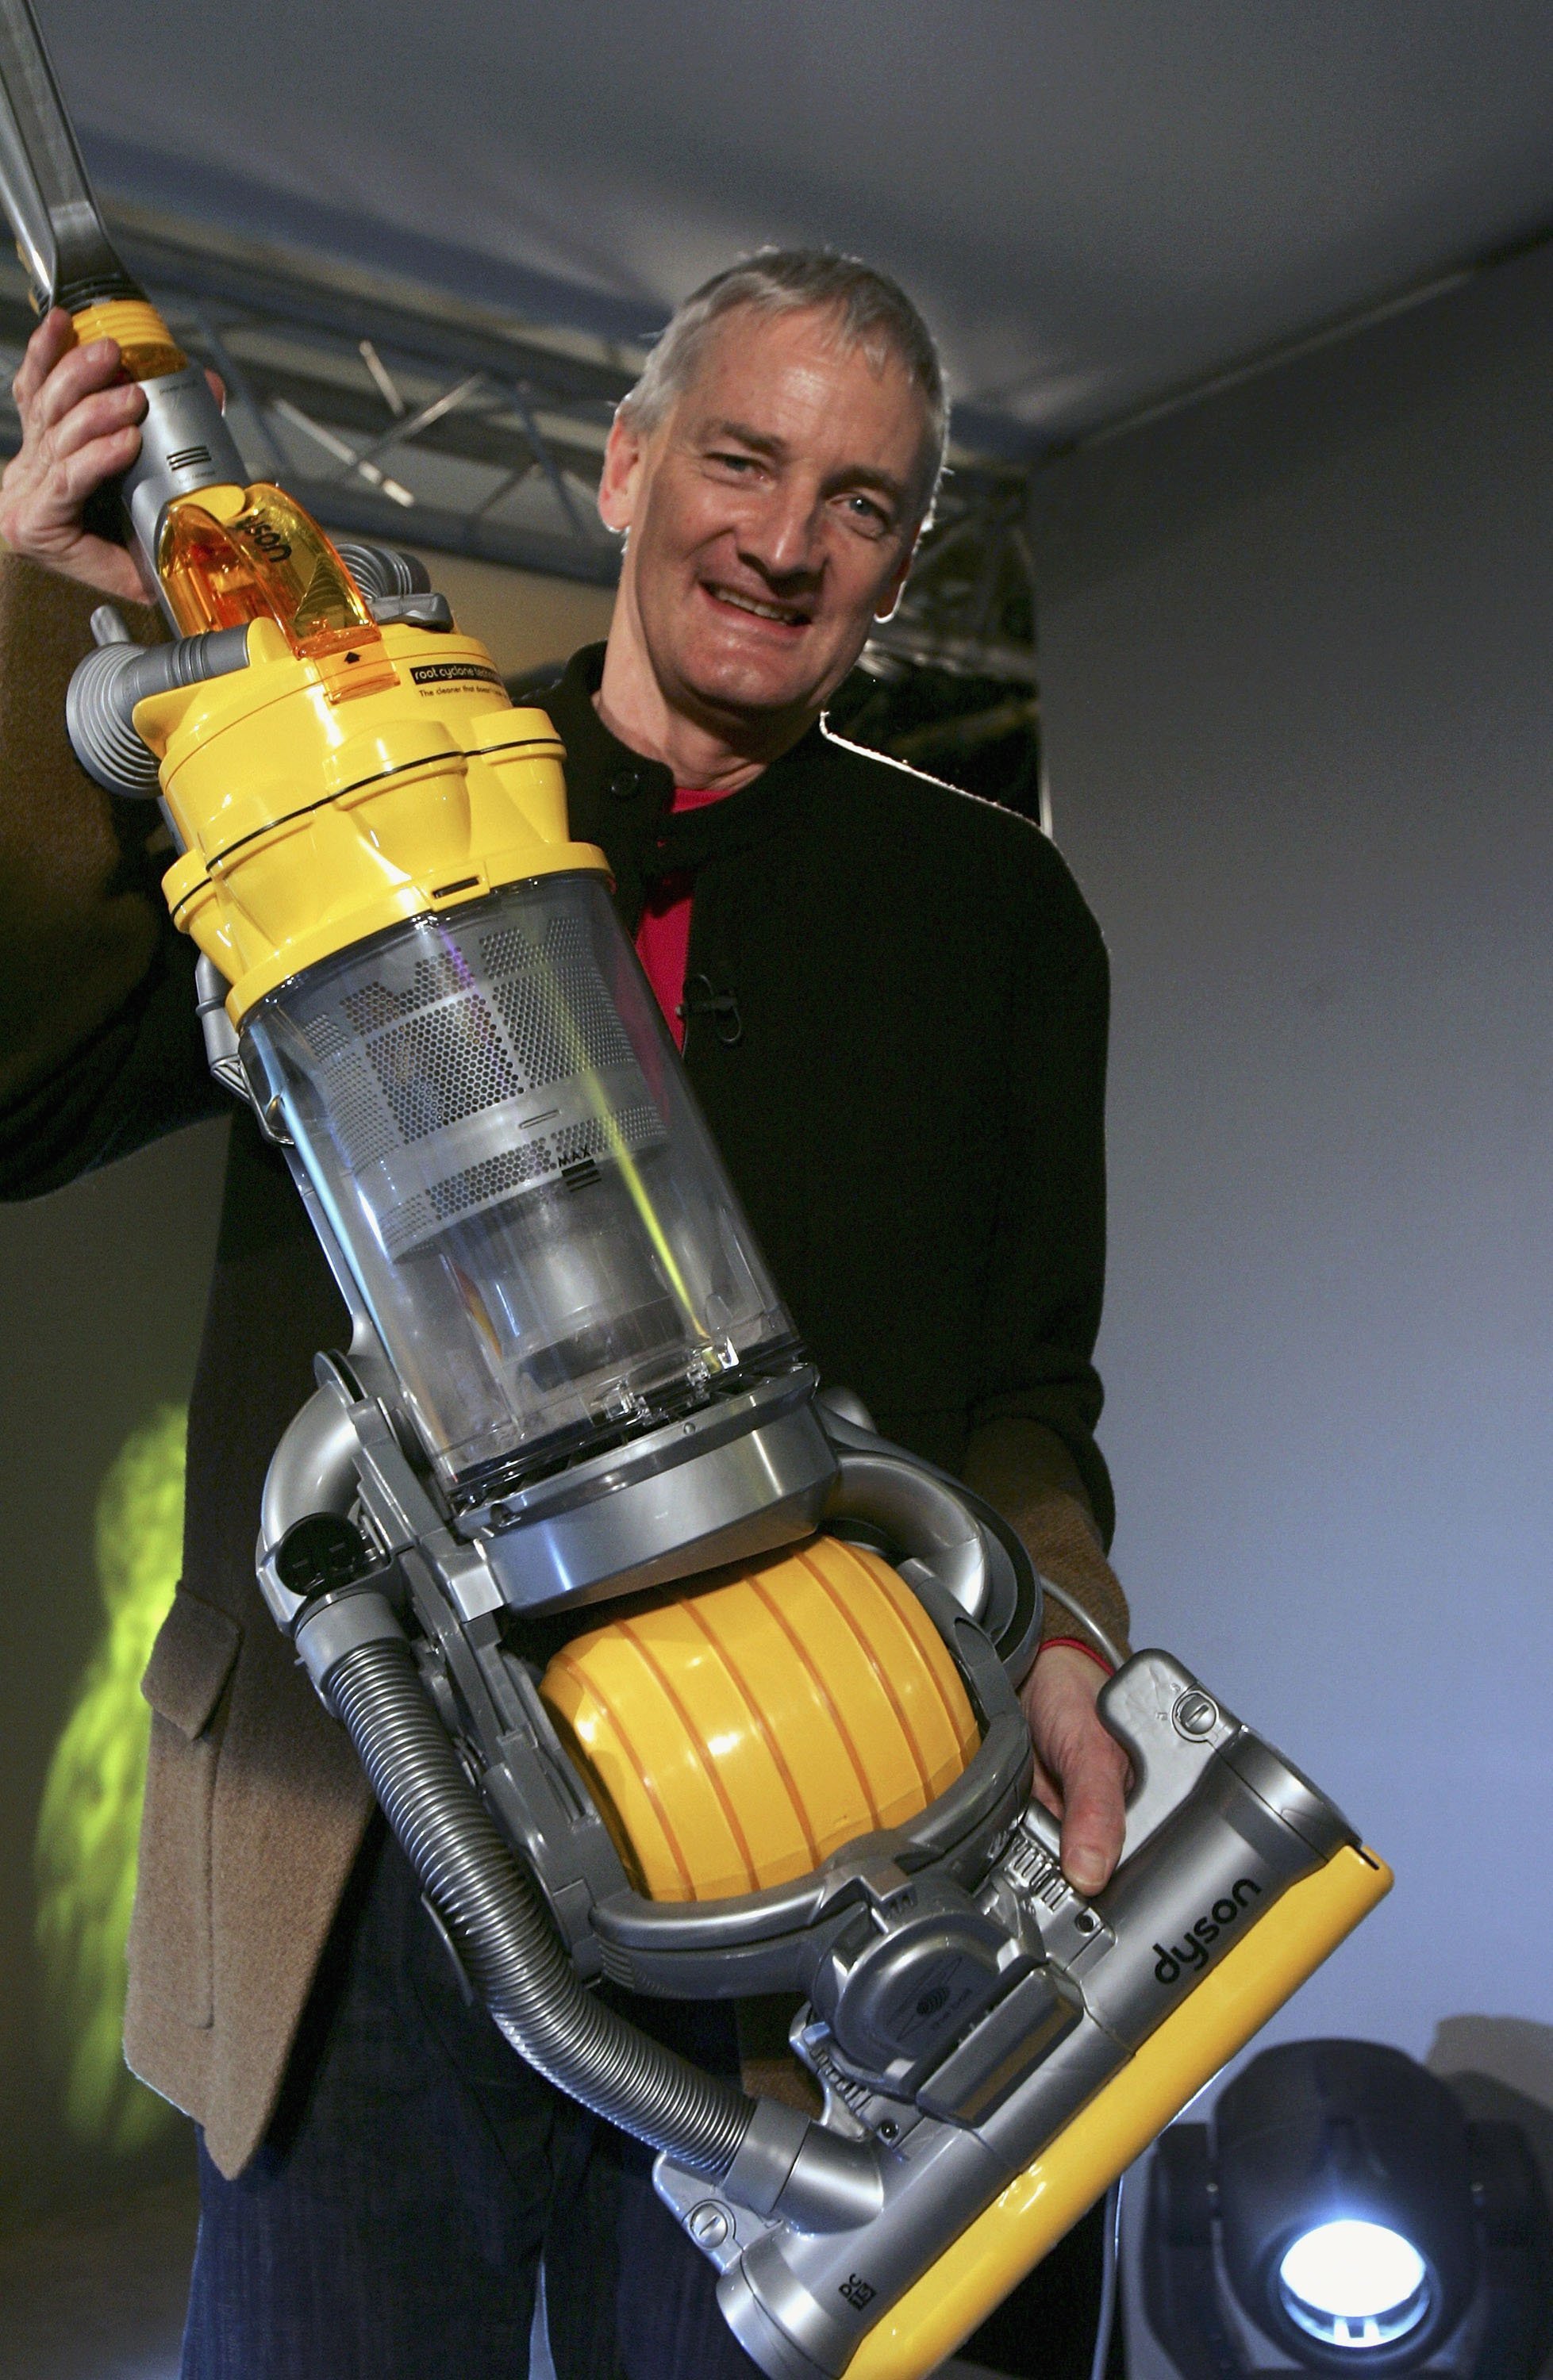 Inventor James Dyson is seen at the launch of his latest hoovering invention on March 14, 2005 in London| Photo: Getty Images